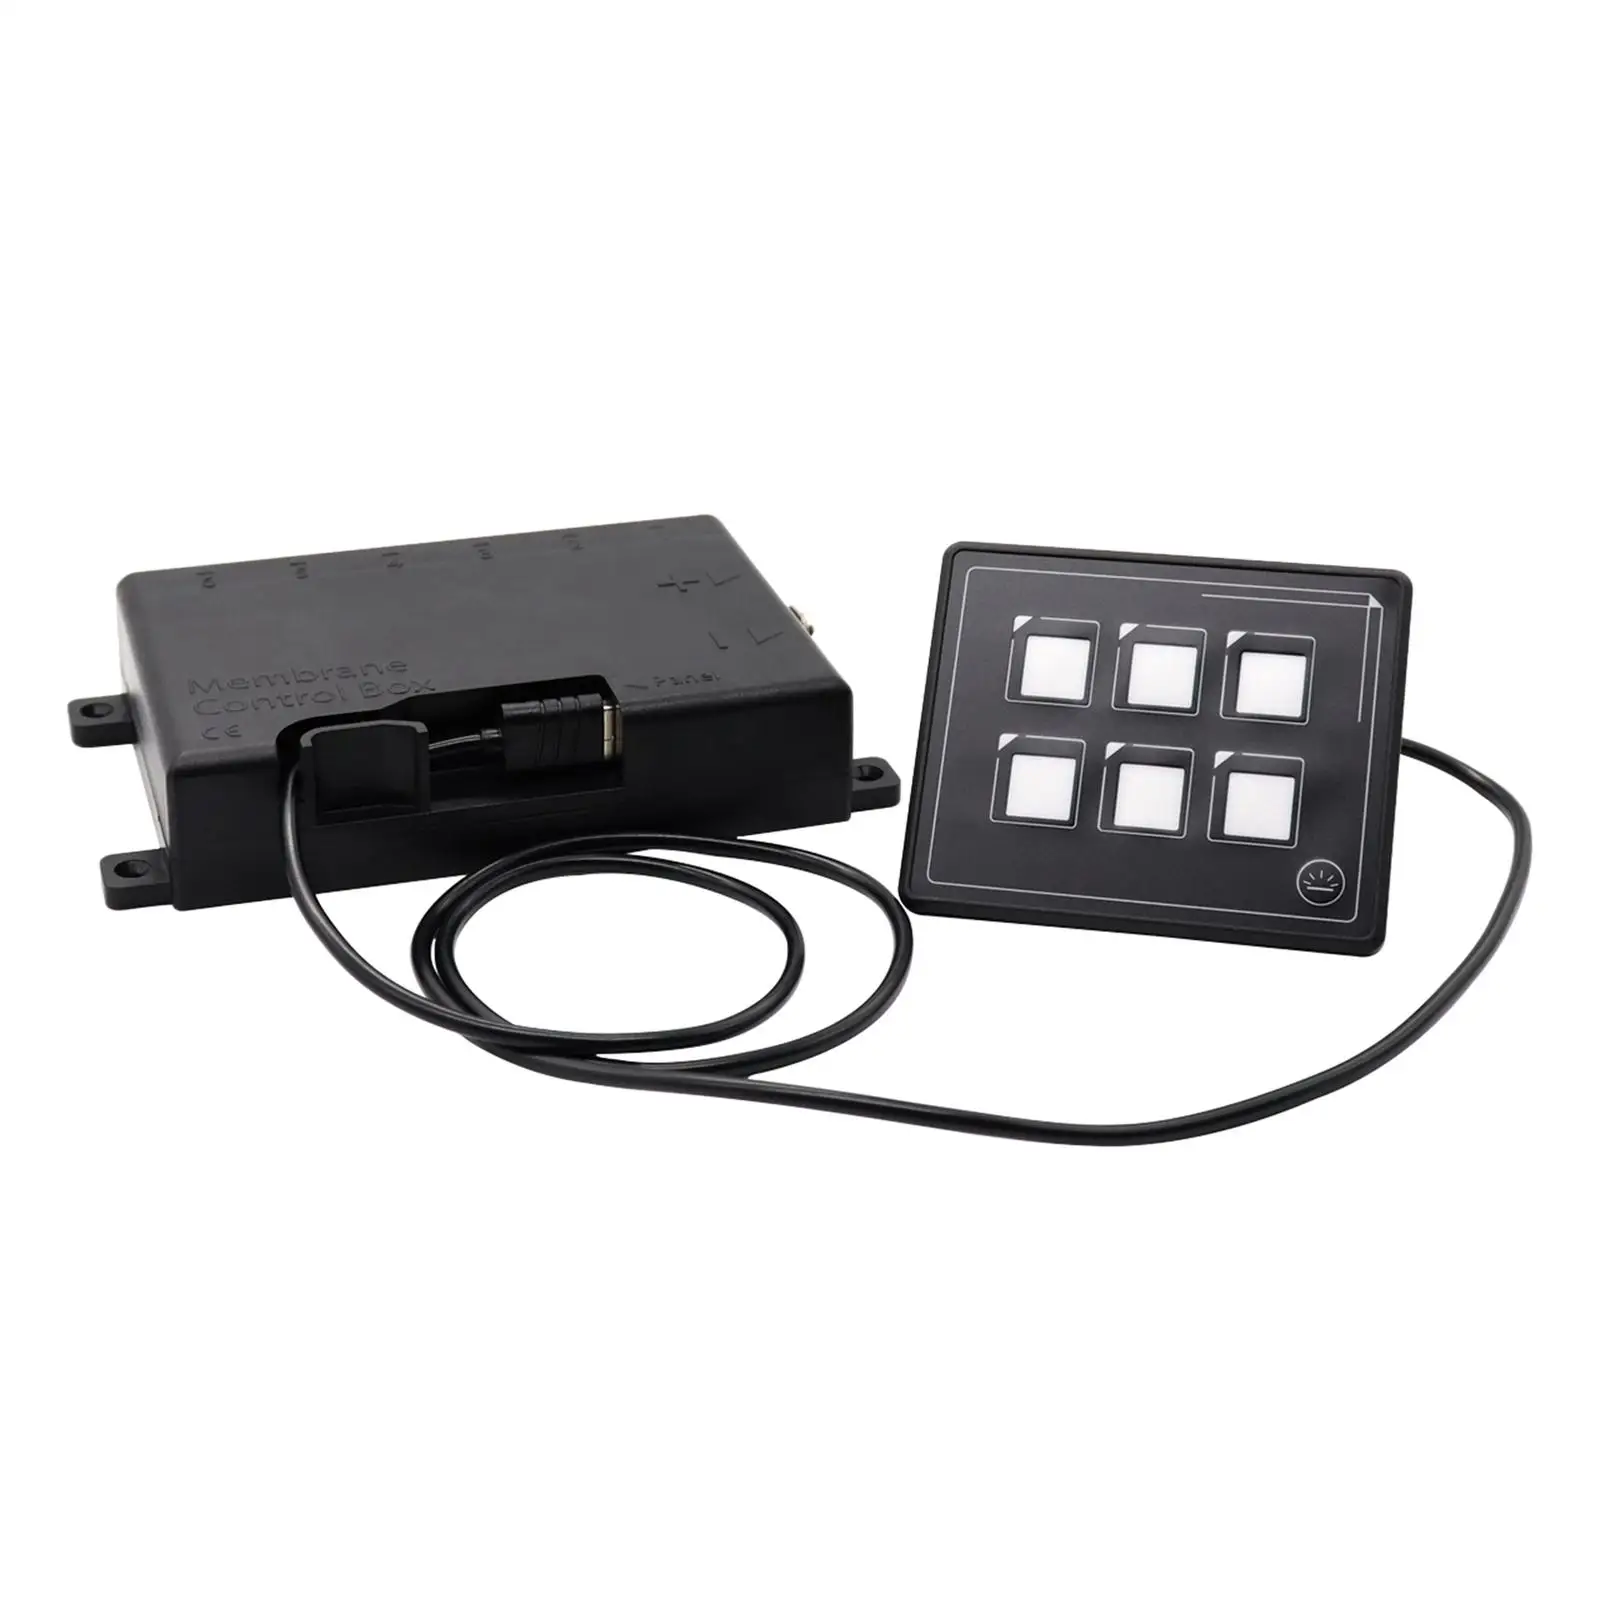 6 Pin Film Button Touch Screen LED Switch Panel for SUV Boat